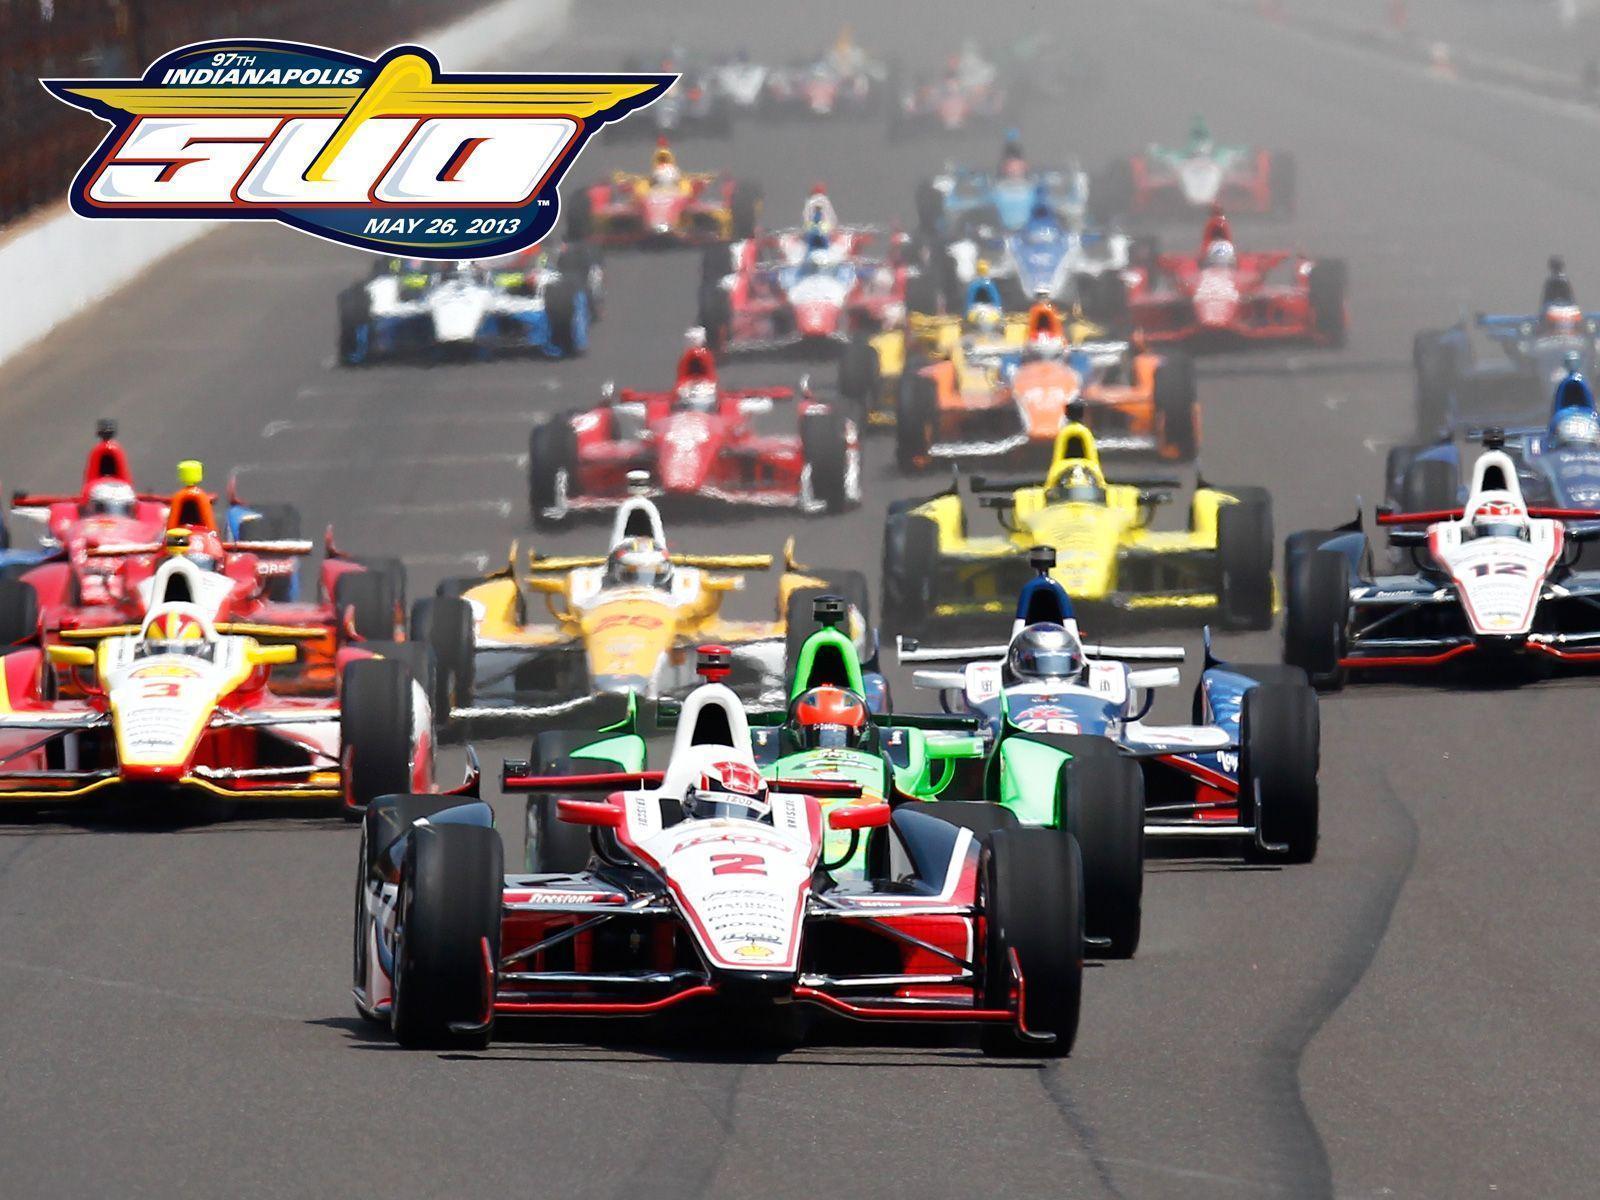 best image about Indy 500. Cars, 2014 chevrolet